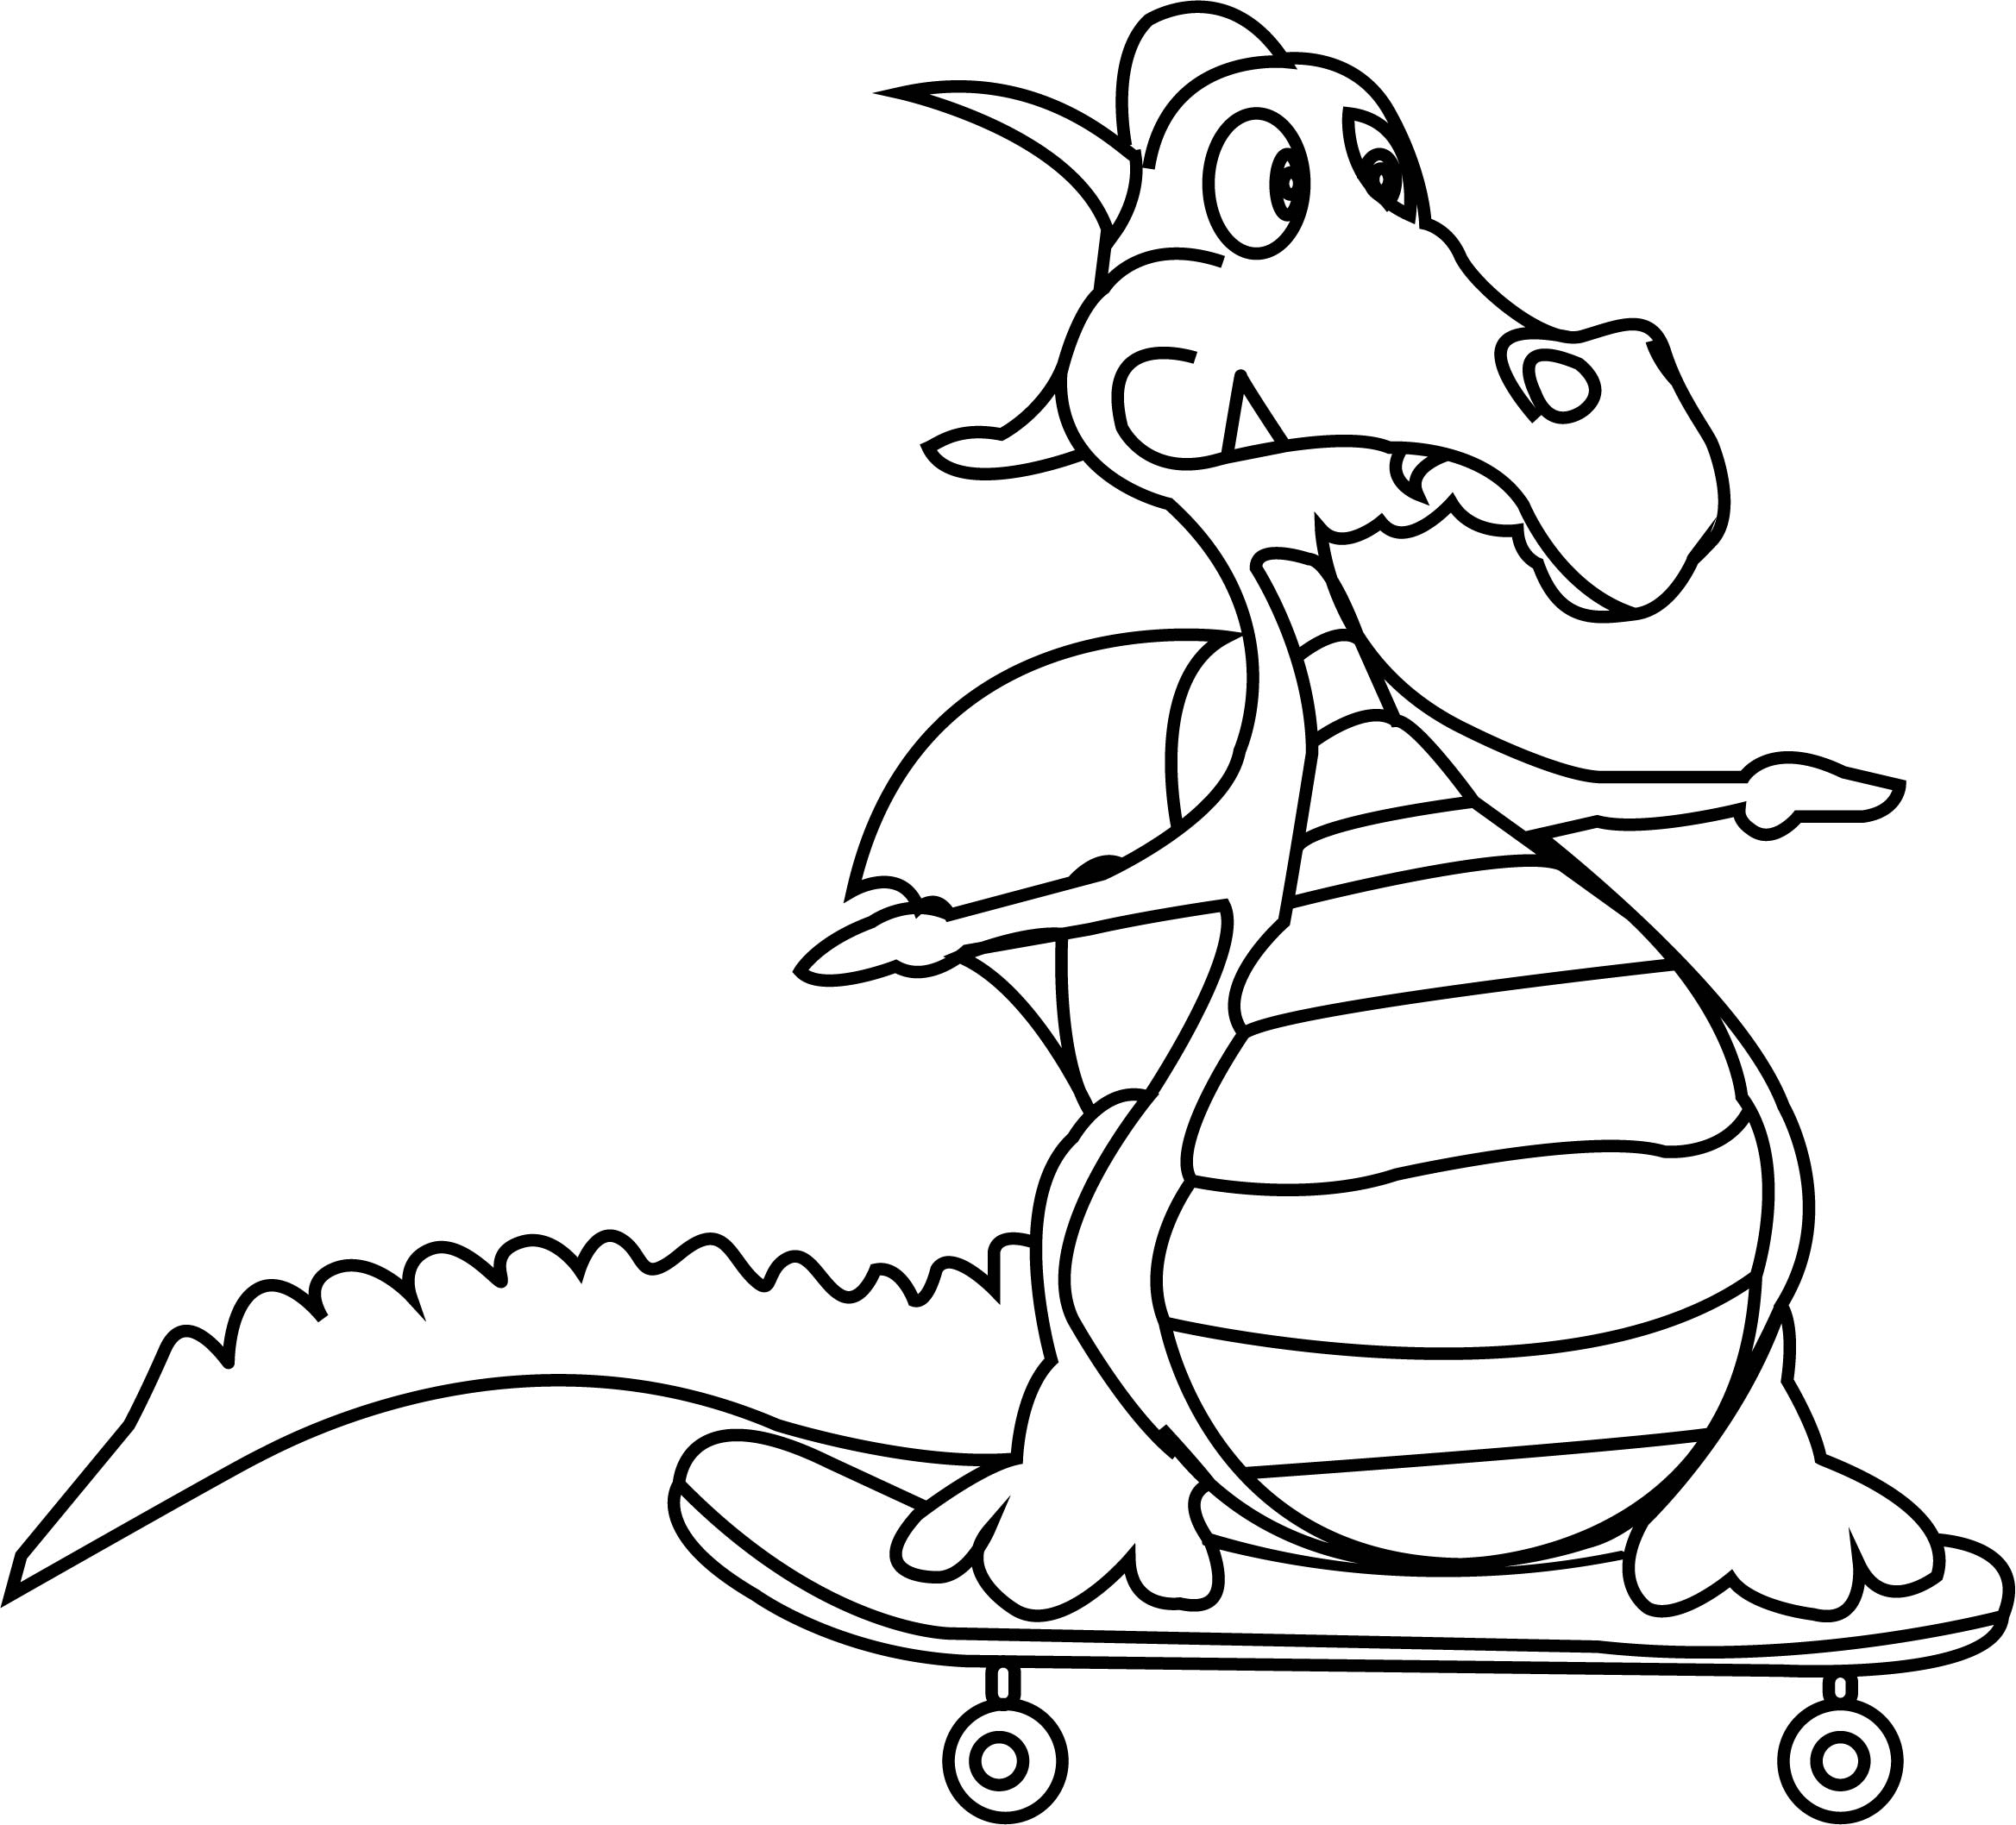  Fun Kids Coloring Pages To Print 10